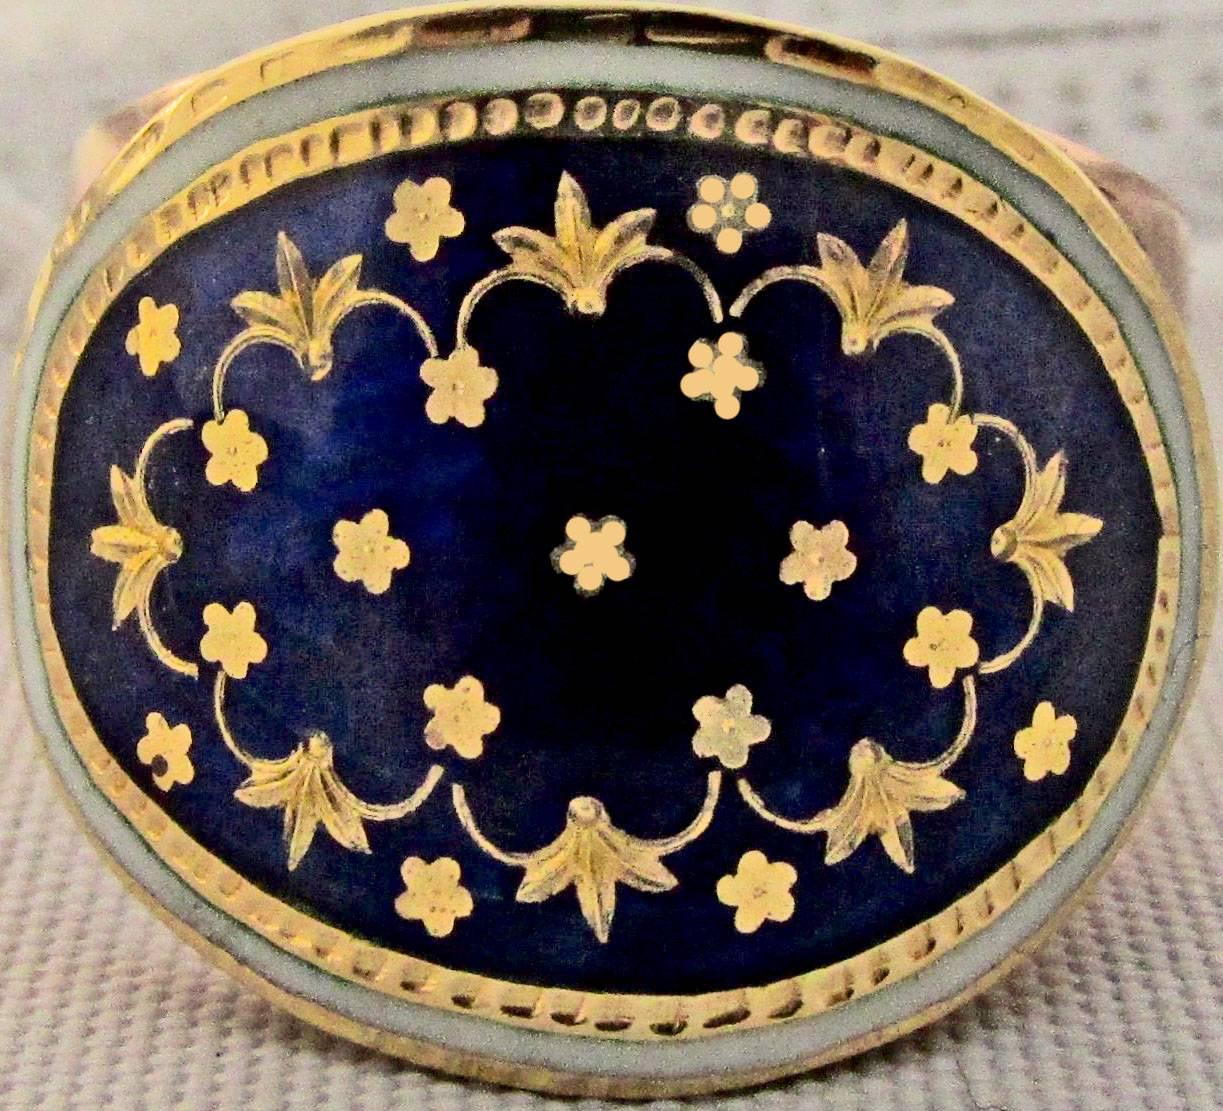 Elegant George III 9K gold ring decorated in cobalt blue & white enamel in a flower and leaf design. The ring is engraved on the inside 